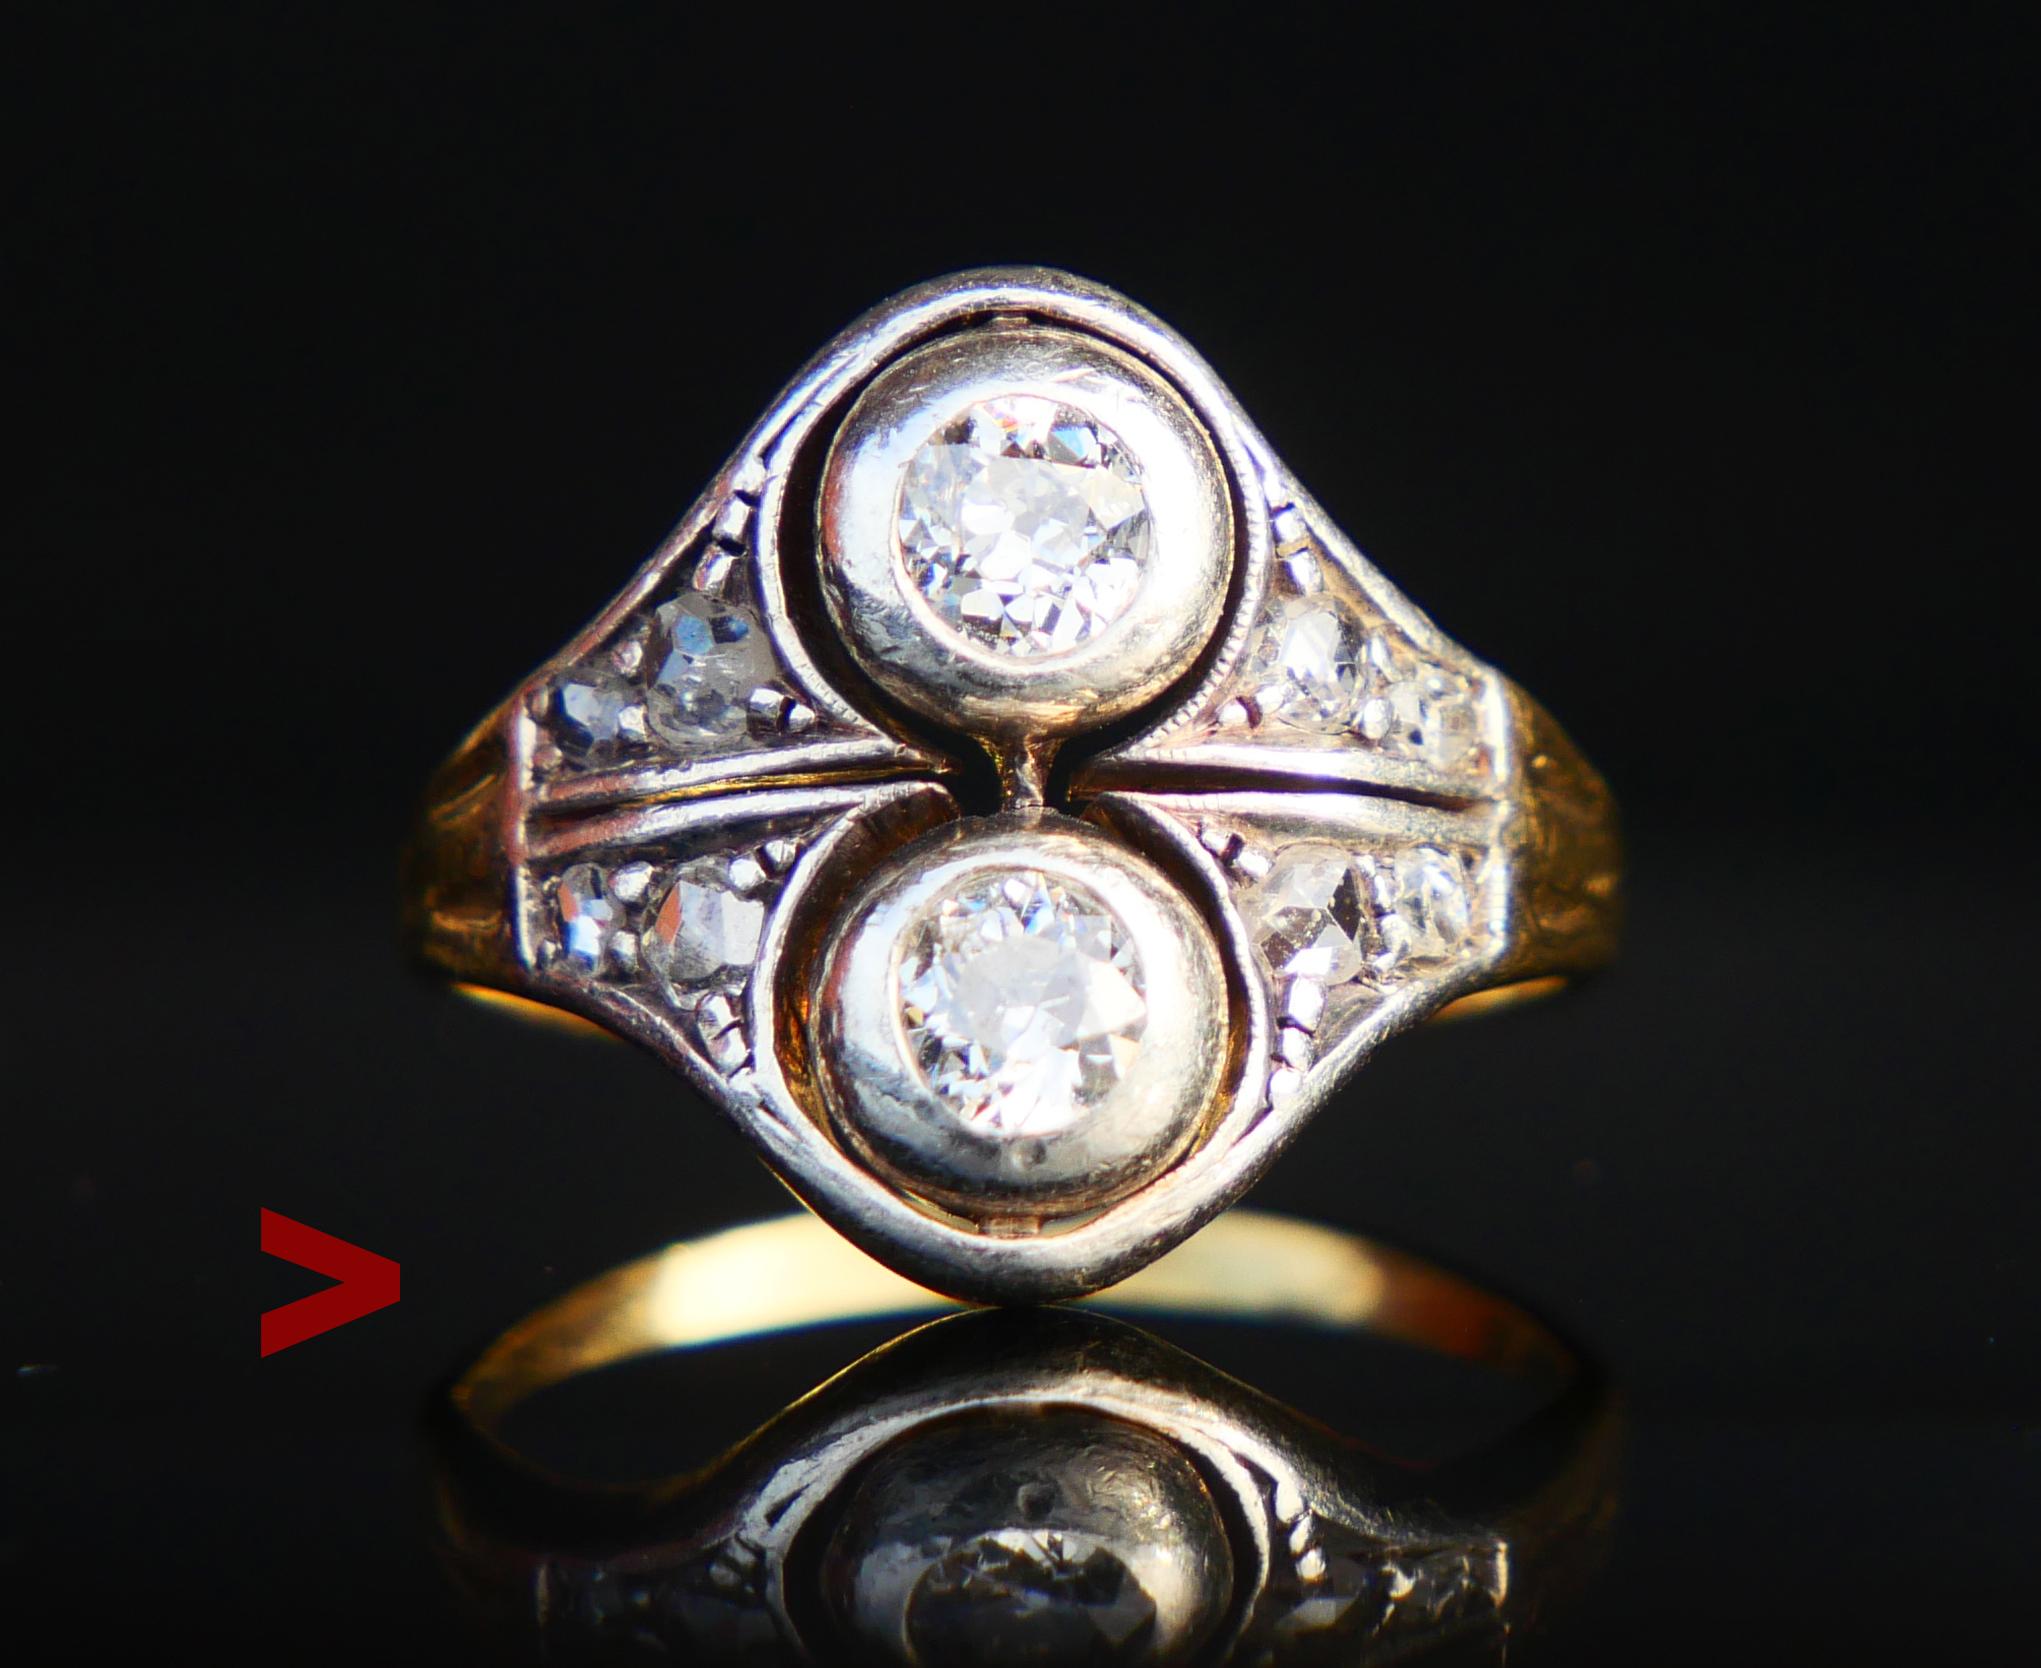 Beautiful antique Diamond Ring hand - made in Russia ca. late XIX - early XX century.

Not hallmarked. The crown is composite / with clusters in Silver on top of a solid 18K greenish Yellow Gold band (tested). In fine used condition.

The openwork